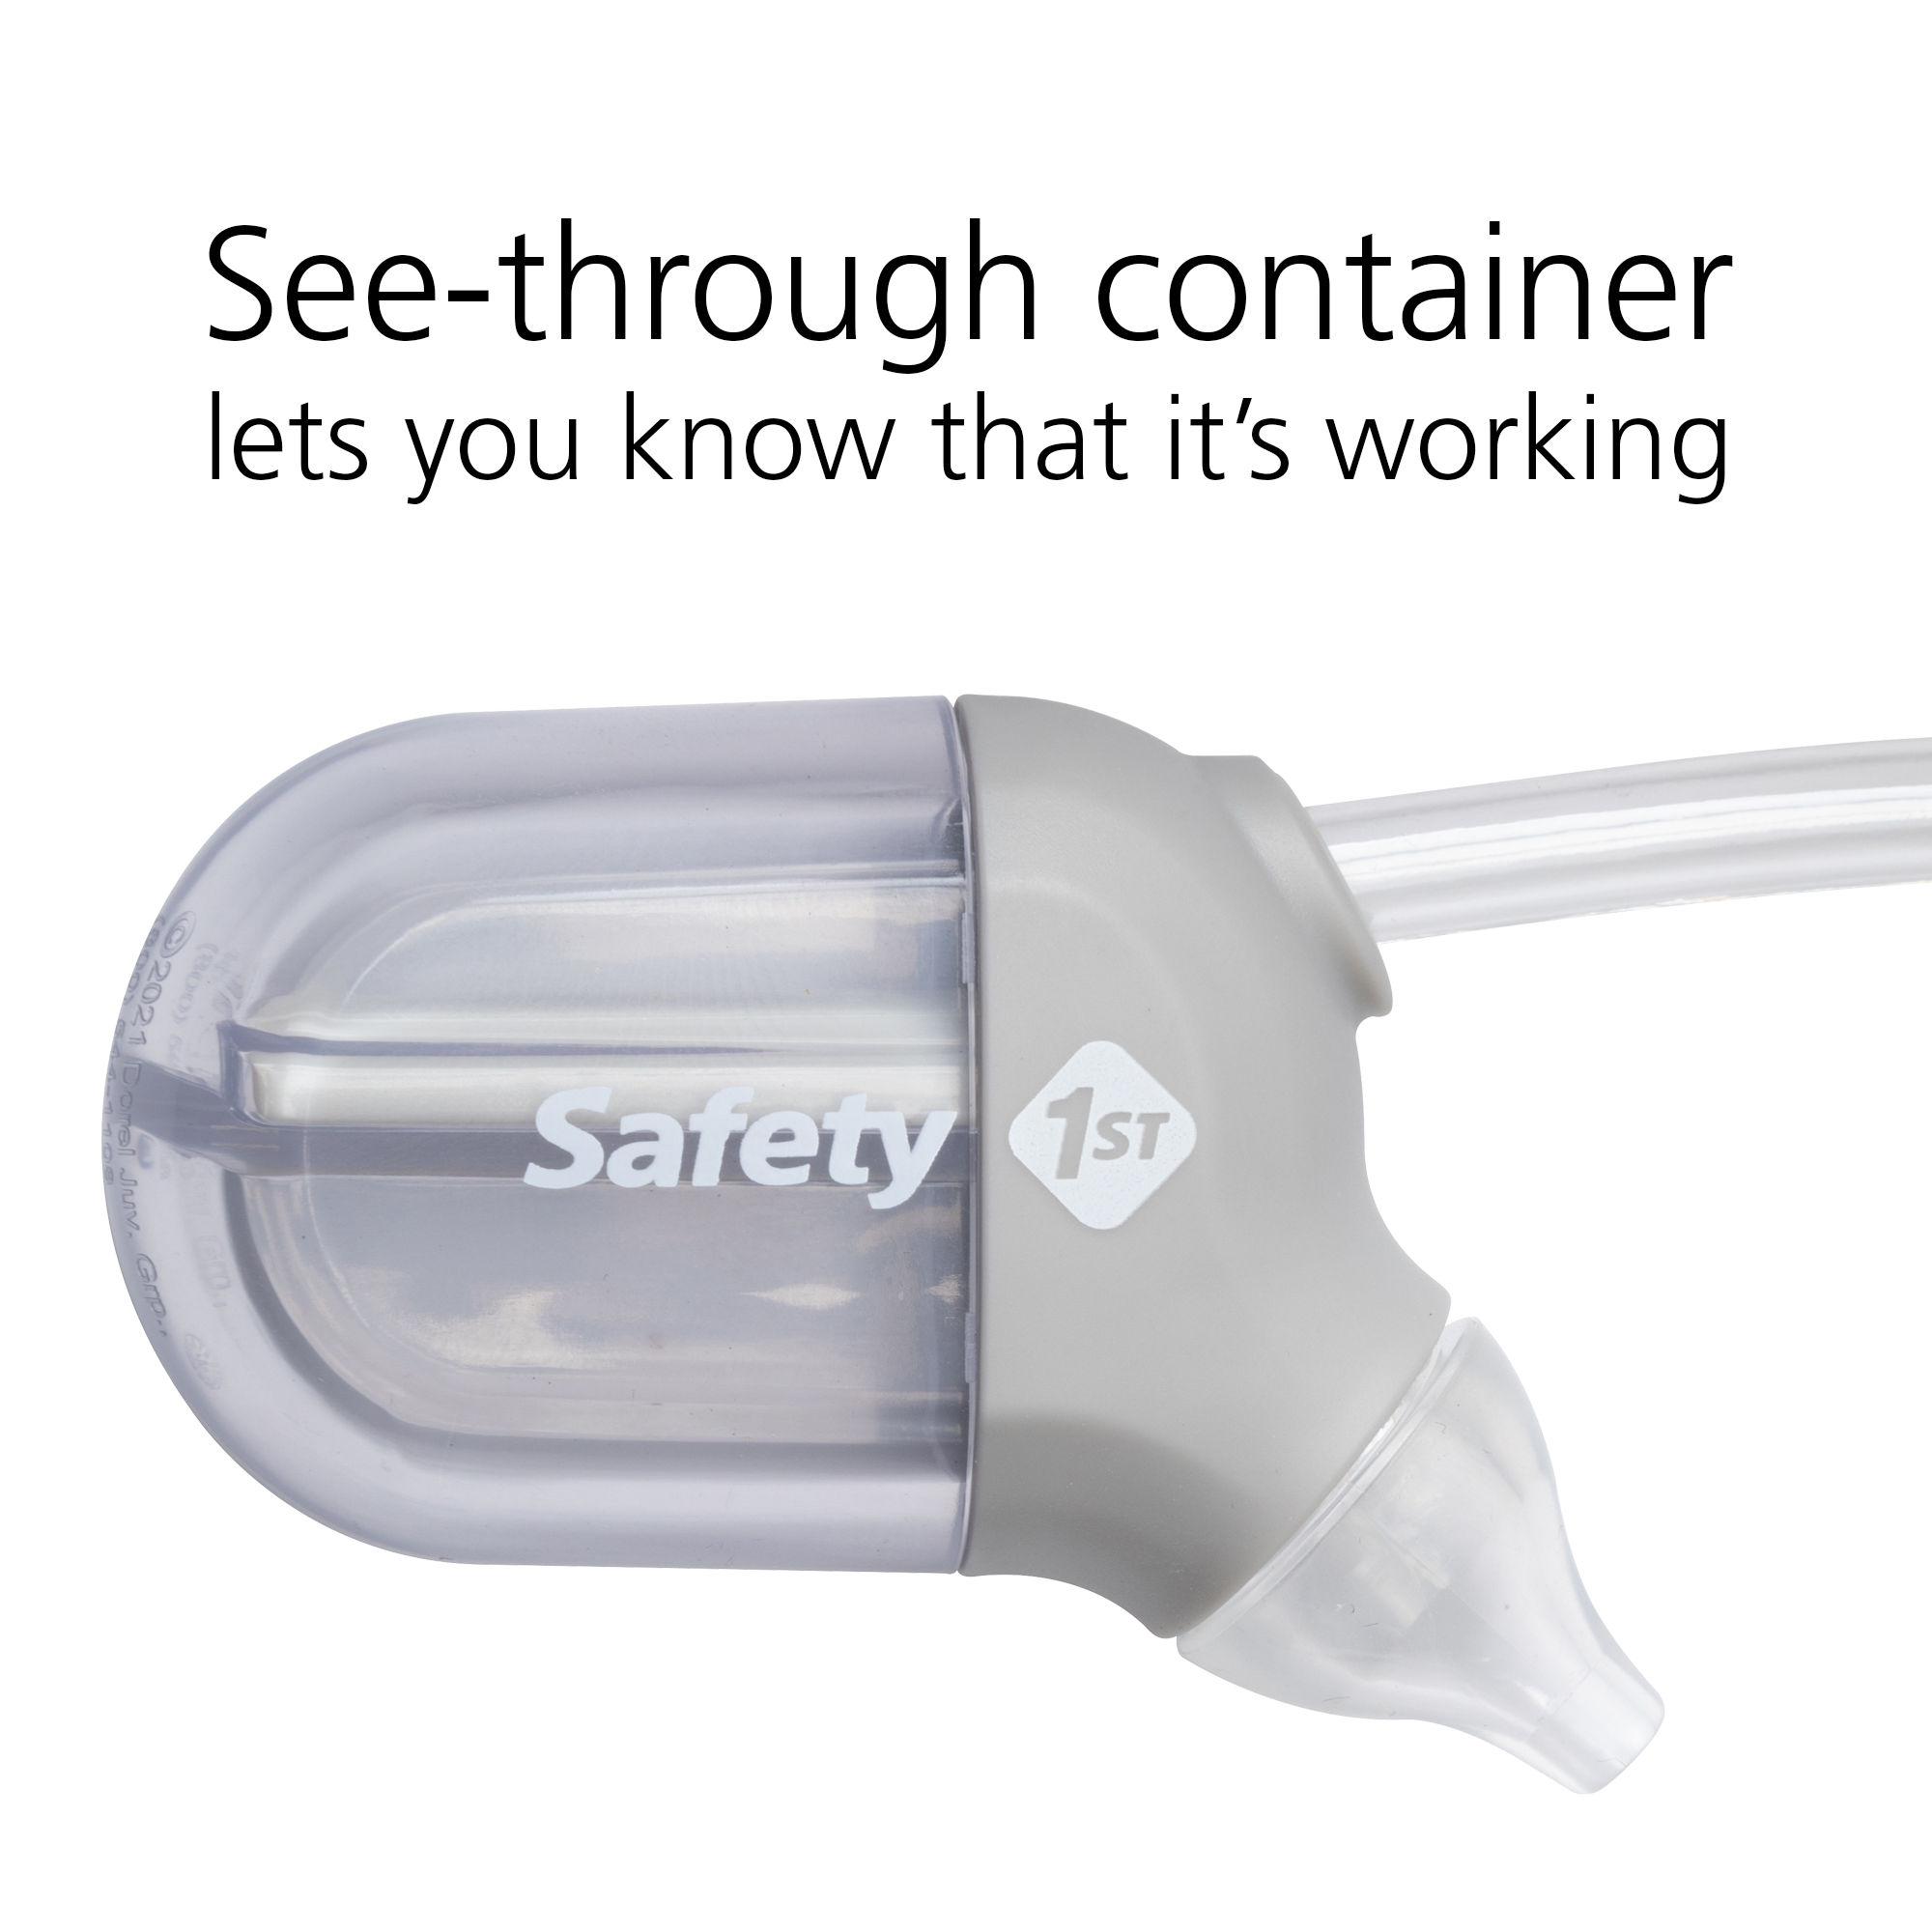 See-through container lets you know that it's working